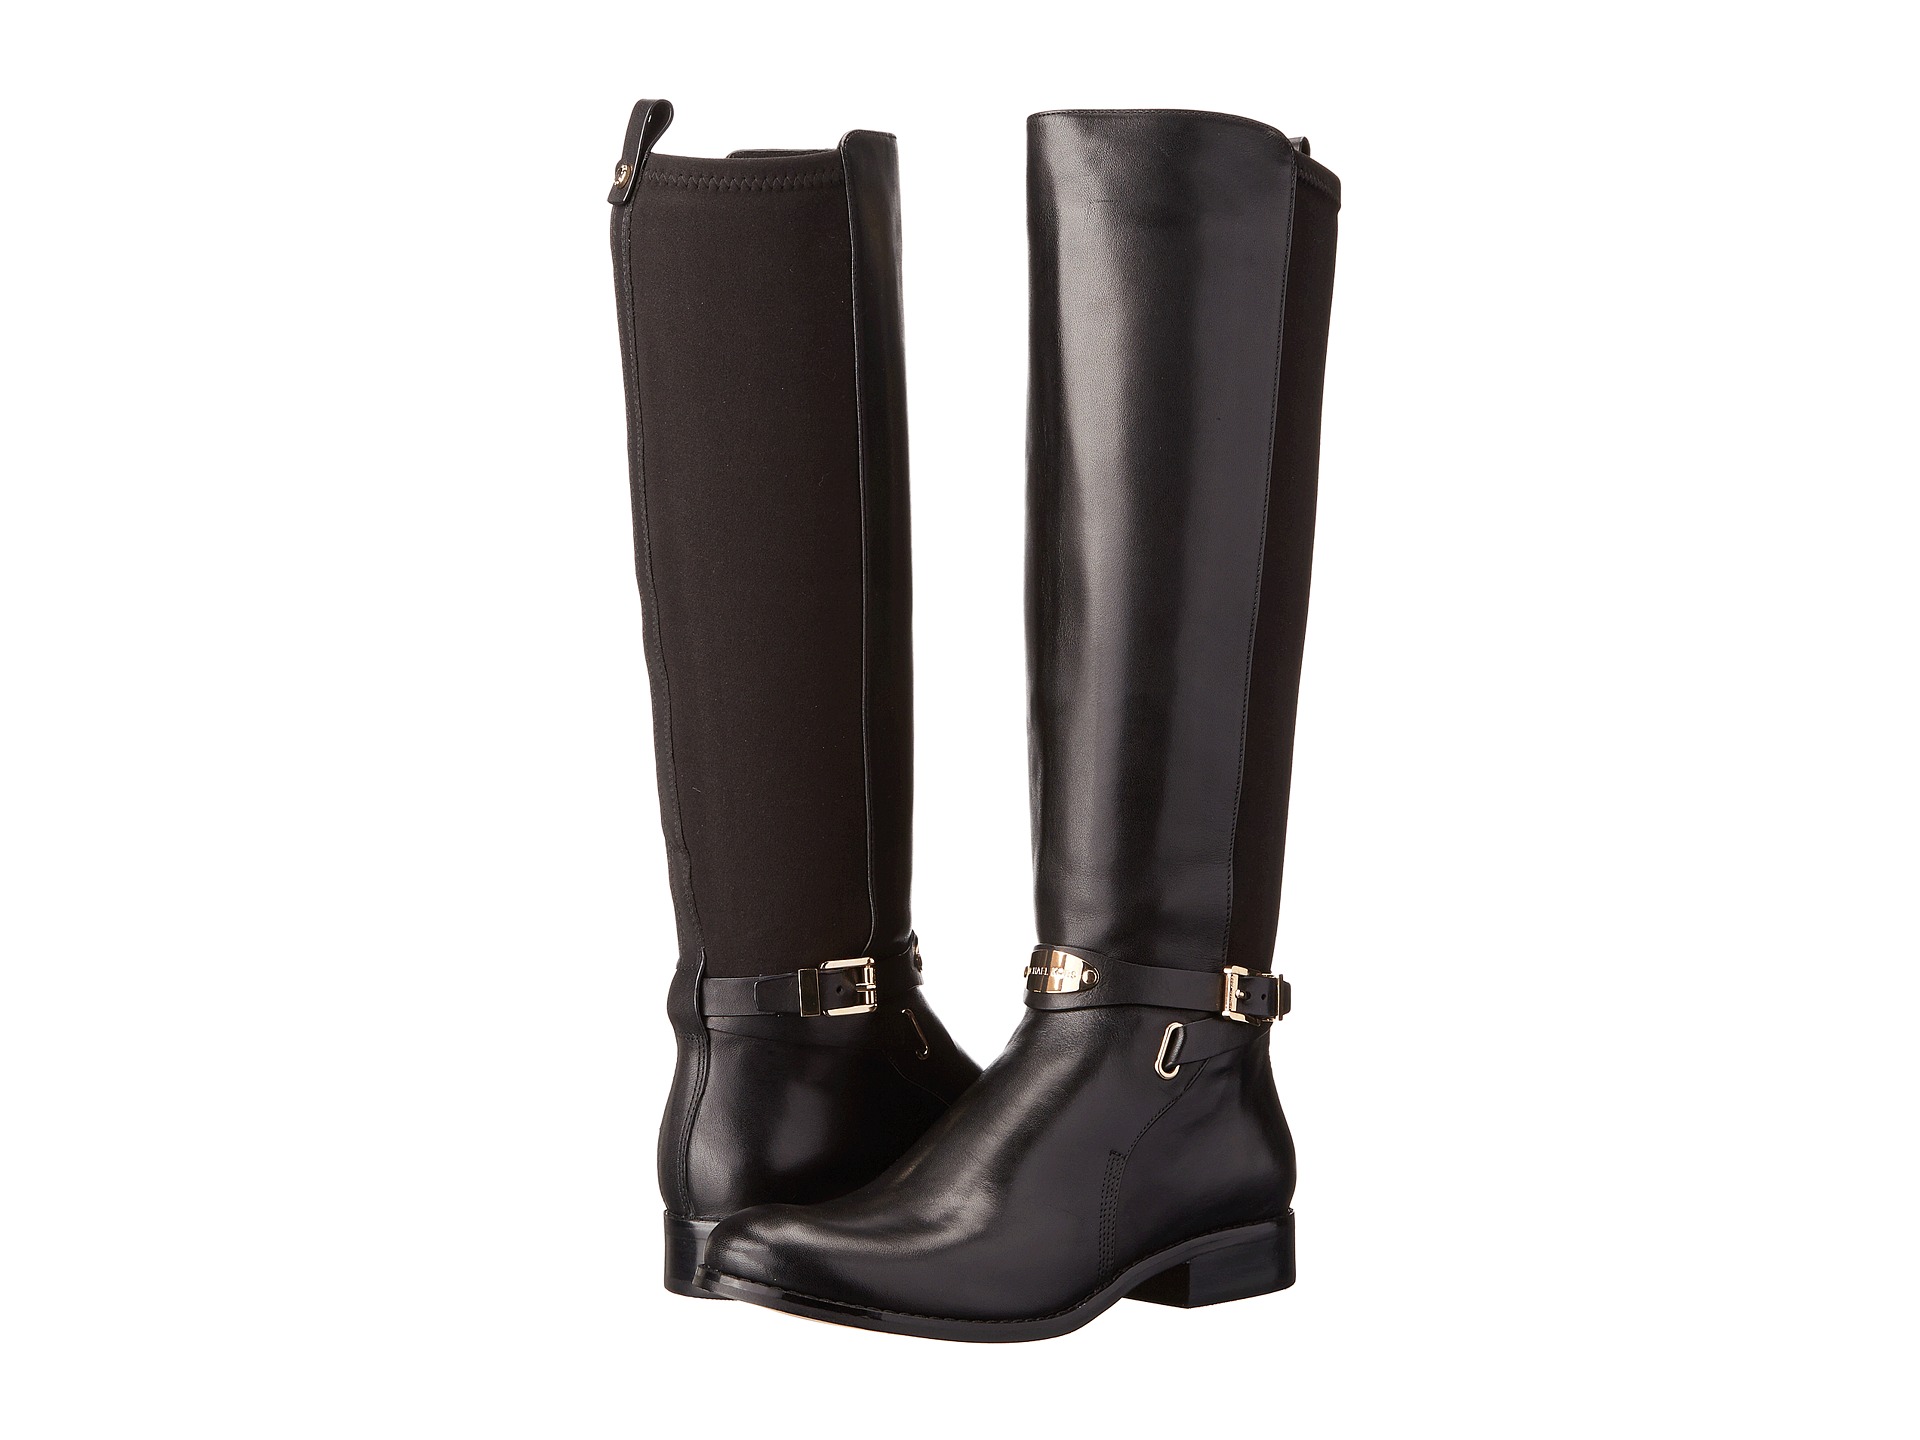 Michael Michael Kors Arley Stretch Boot | Shipped Free at Zappos